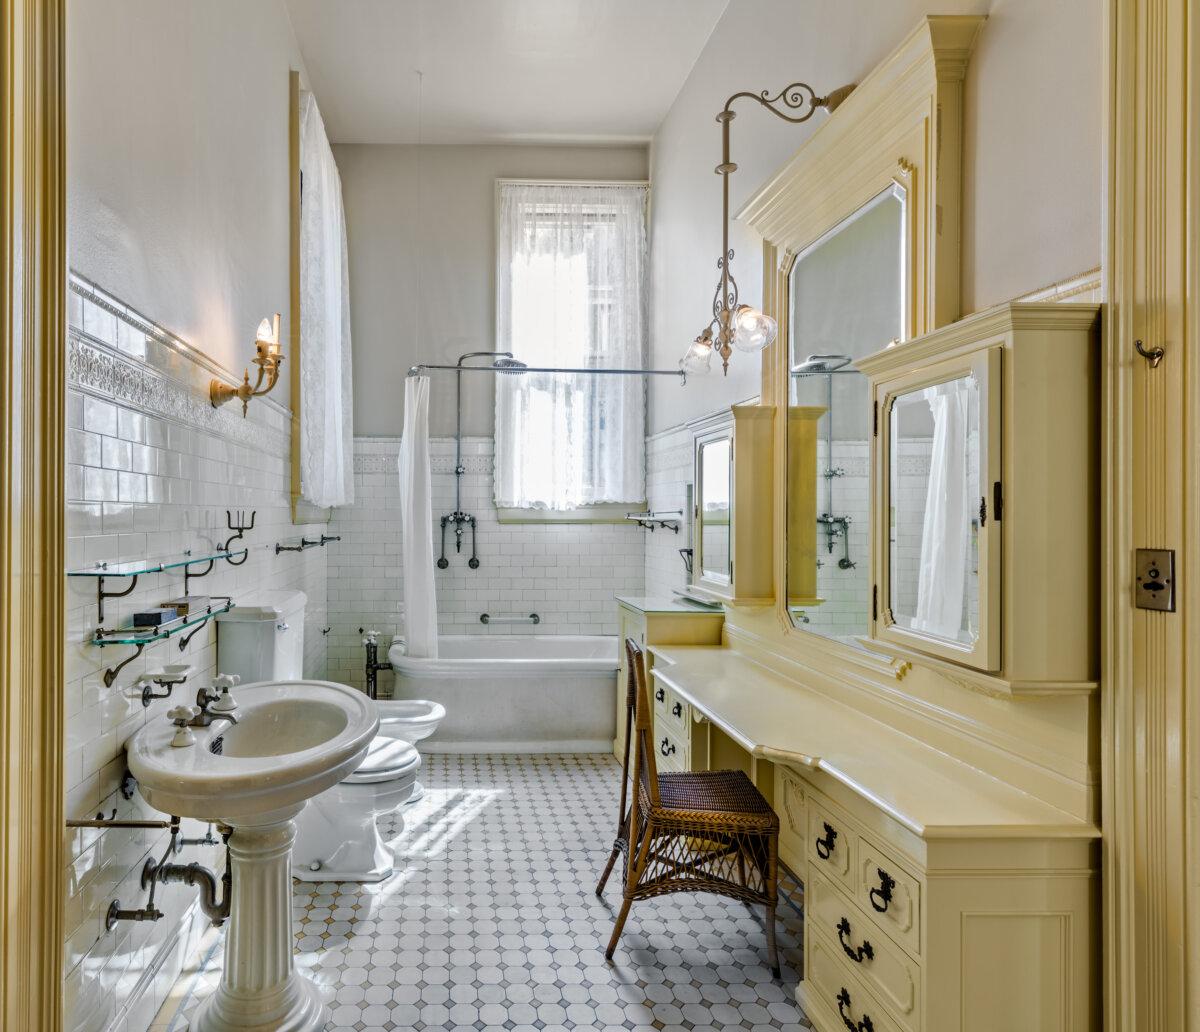 Although some of the fixtures have been updated in the bathroom, the vanity and cabinetry along the wall are original as is the tiled floor, tiled walls, and electric wall sconce lighting. Simple and white was traditional for family bathrooms of the day. A wicker chair sits along the soft yellow vanity and large mirror. (Courtesy of Barry Schwartz Photography)